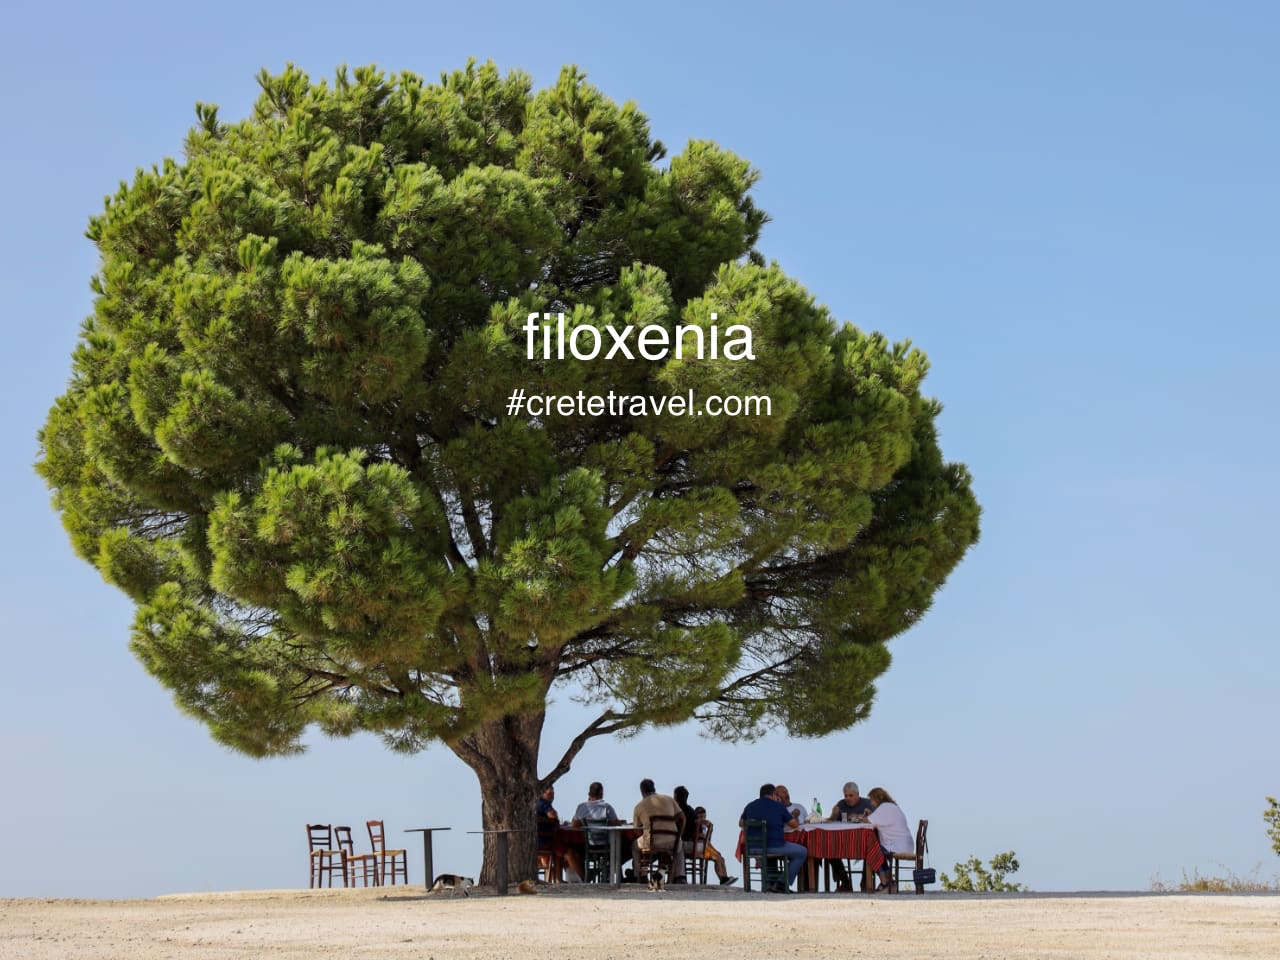 You are our guest - Filoxenia - What’s in a word?